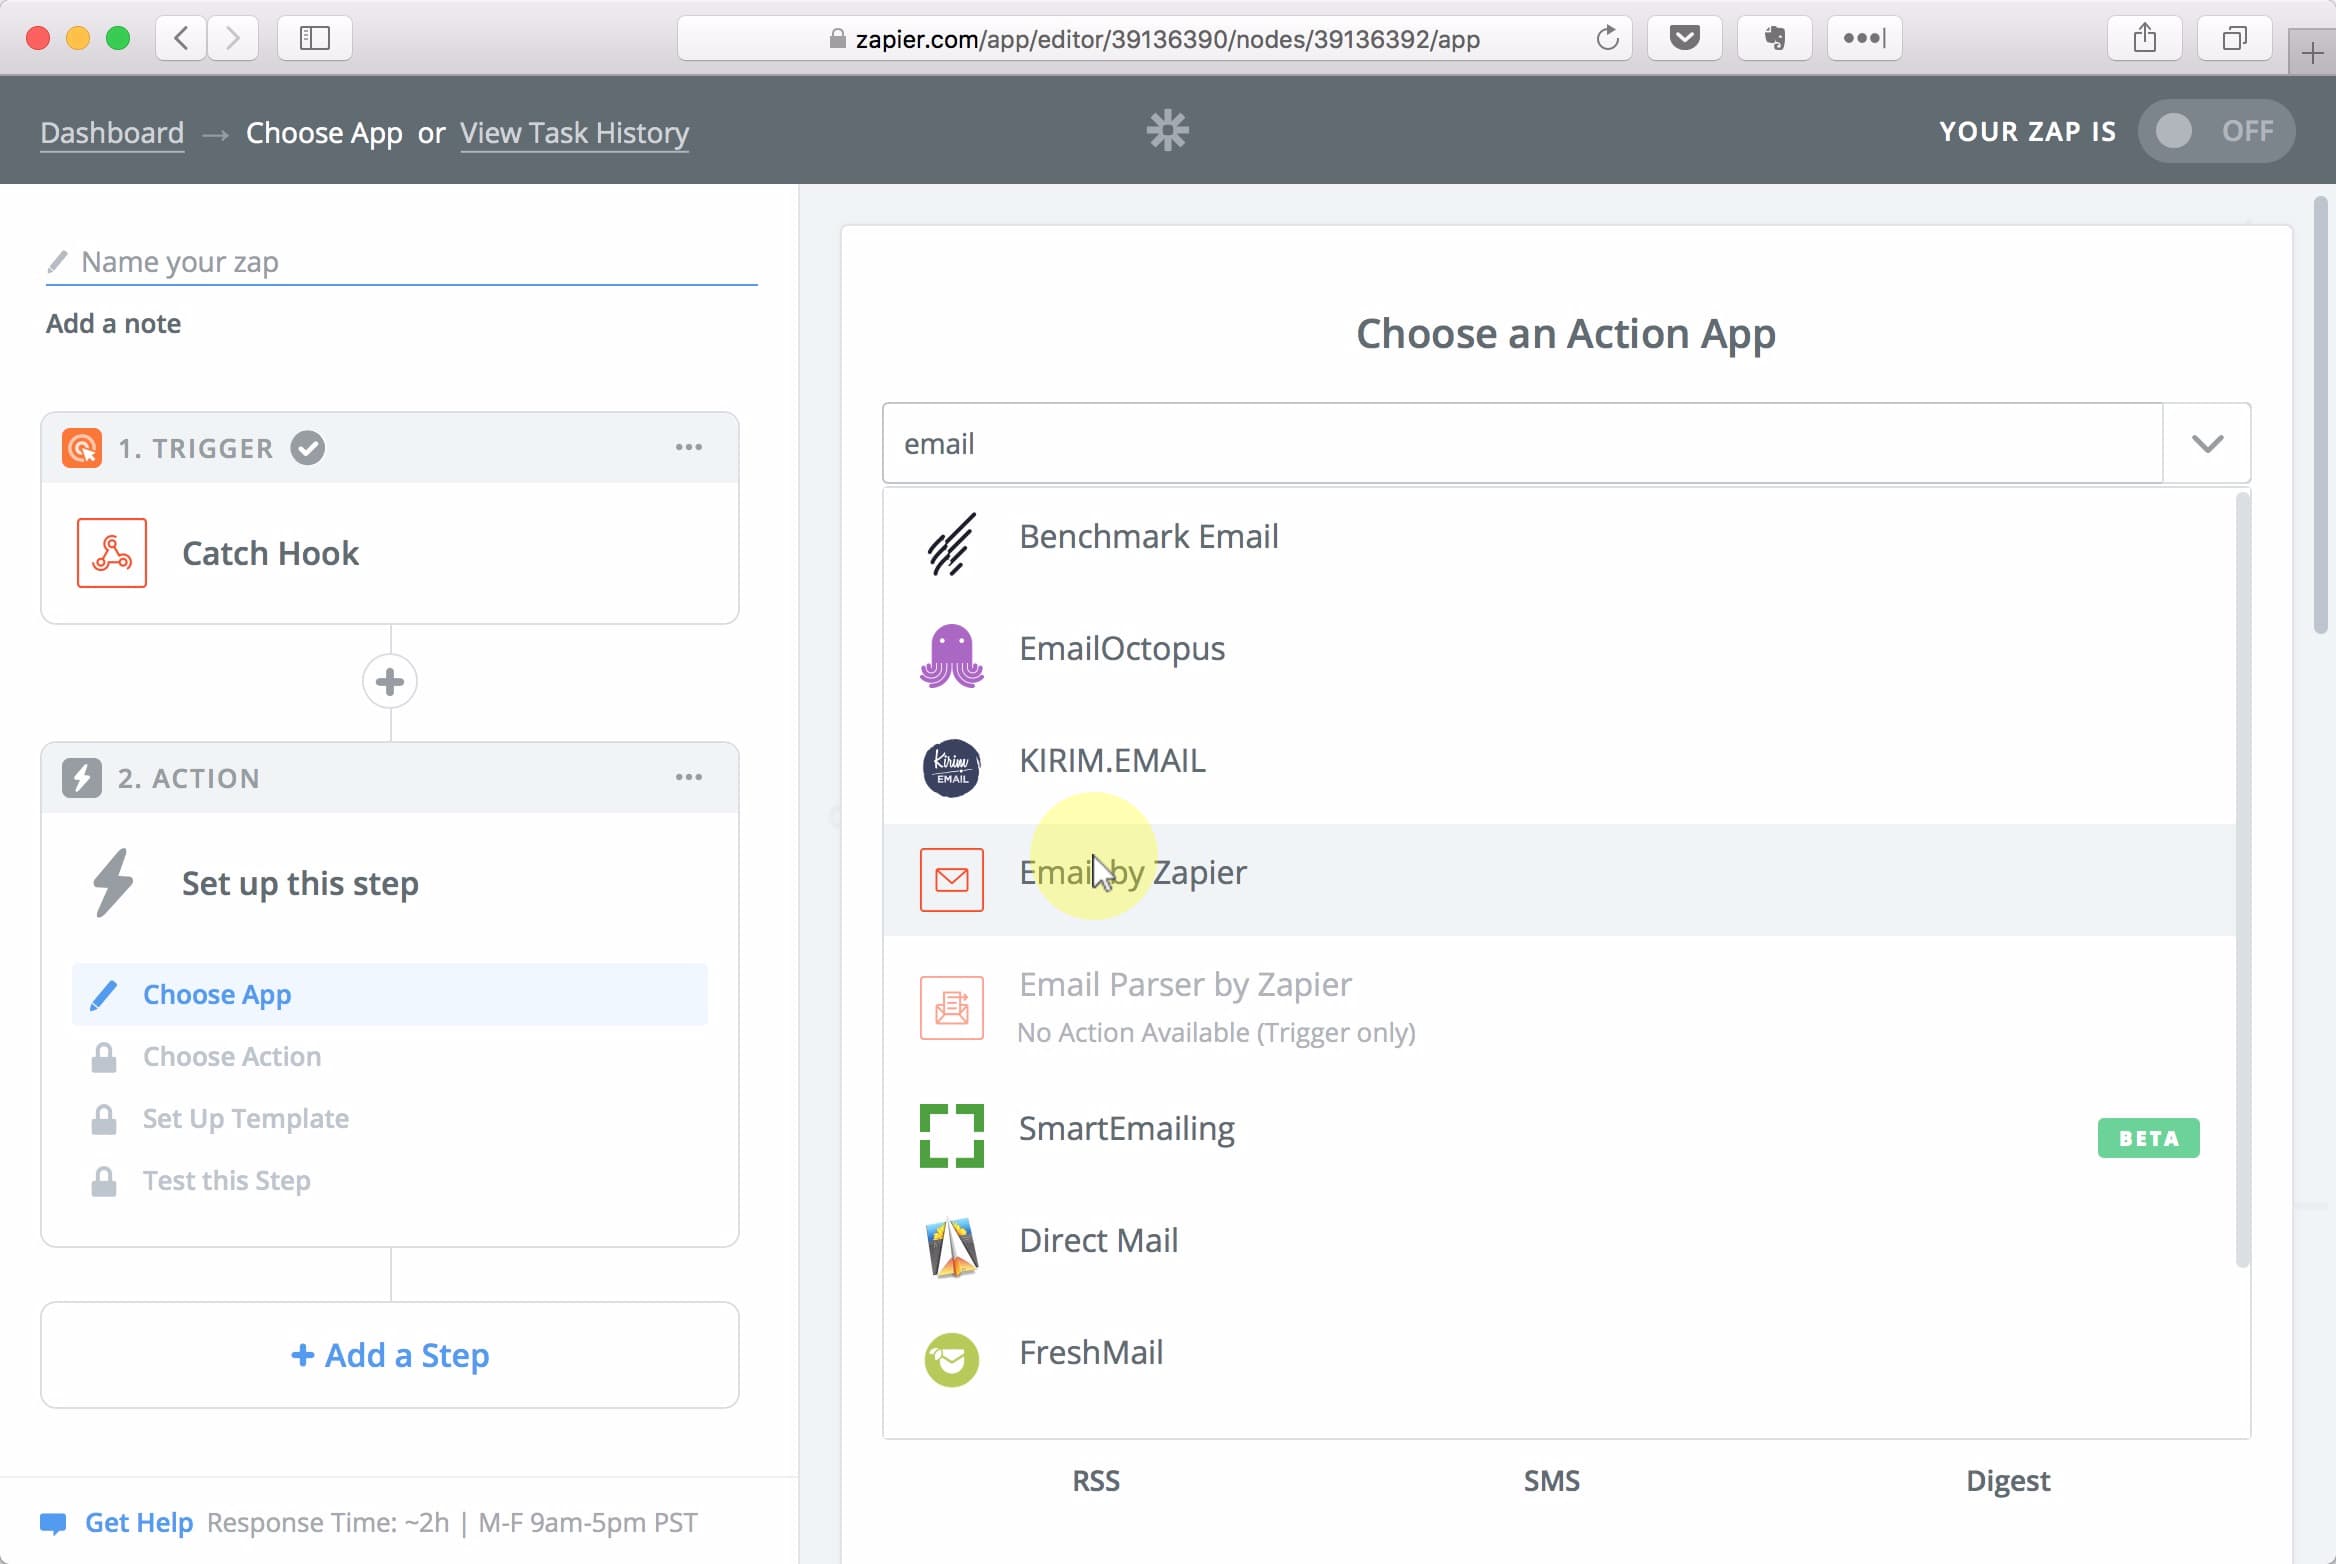 Seach for email and select the Email by Zapier option.;